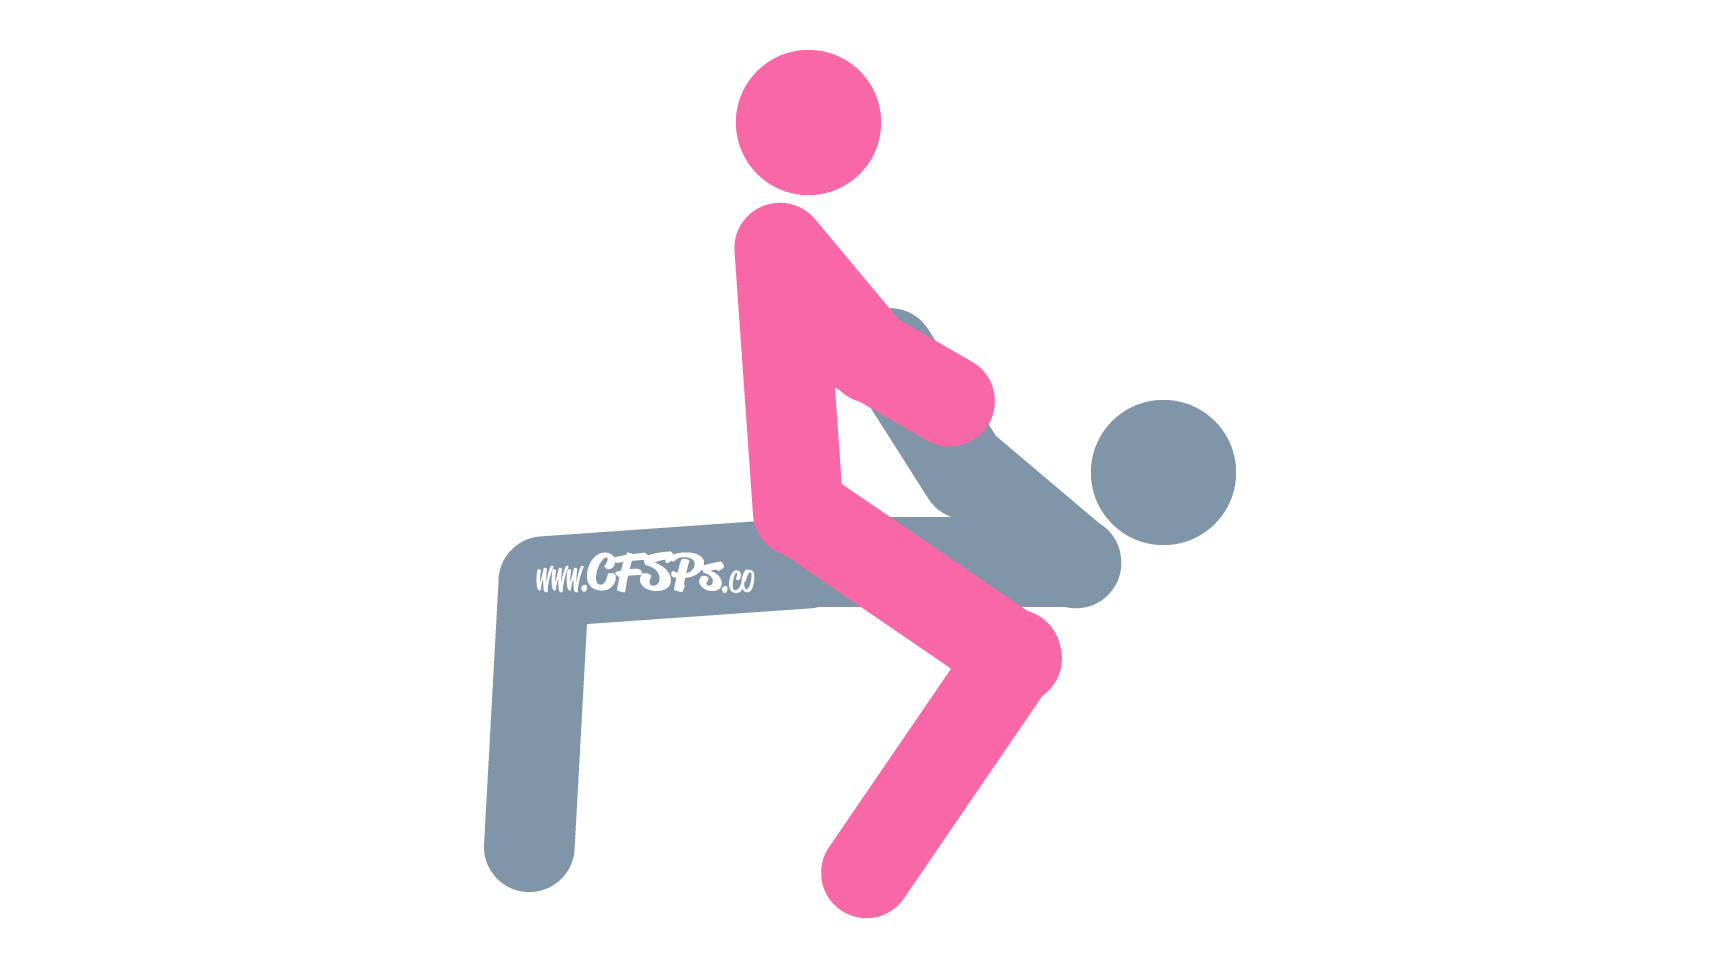 This stick figure image depicts a man and woman having sex in the Hobbyhorse sex position. The man is lying on his back on a rocking chair or recliner with his knees bent and feet on the ground. The woman is straddling his pelvis and holding his hands.